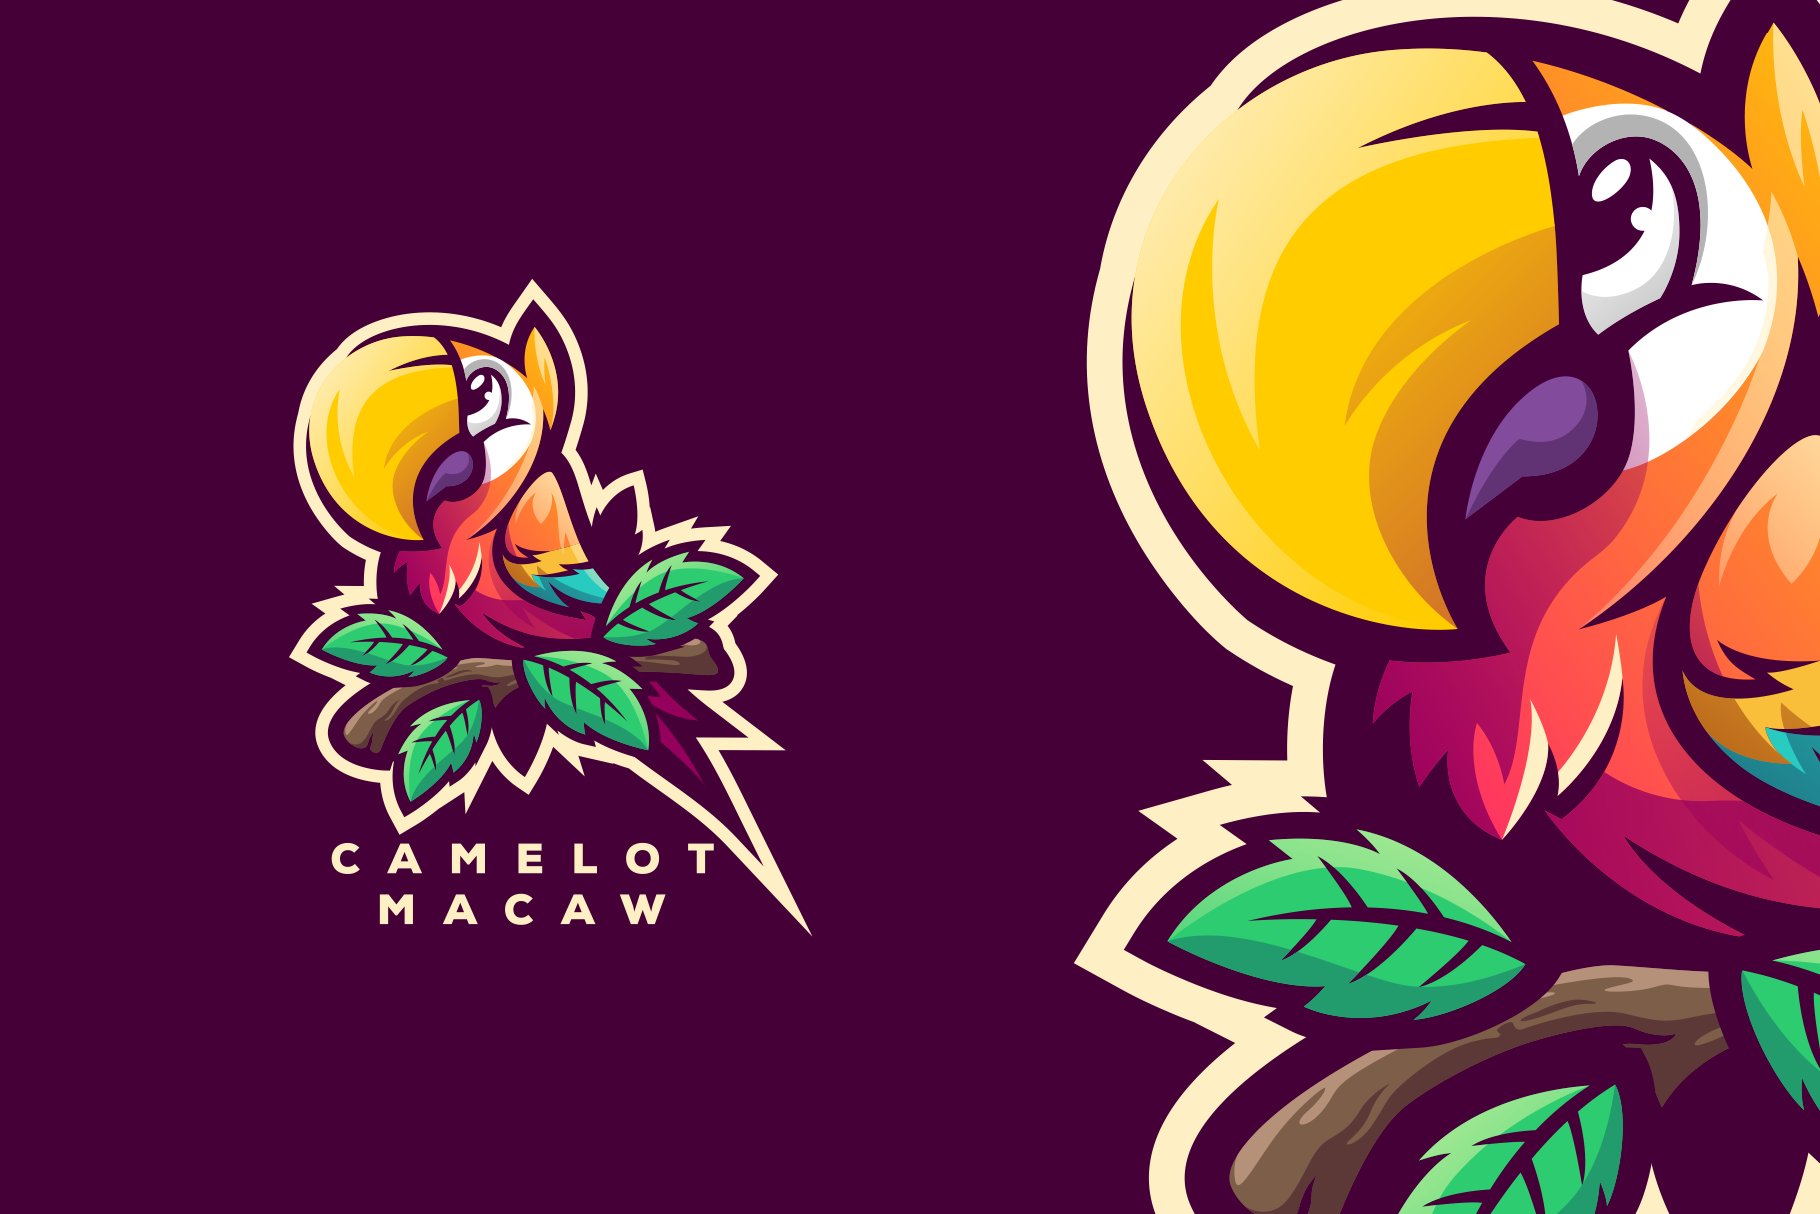 Camelot Macaw Logo cover image.